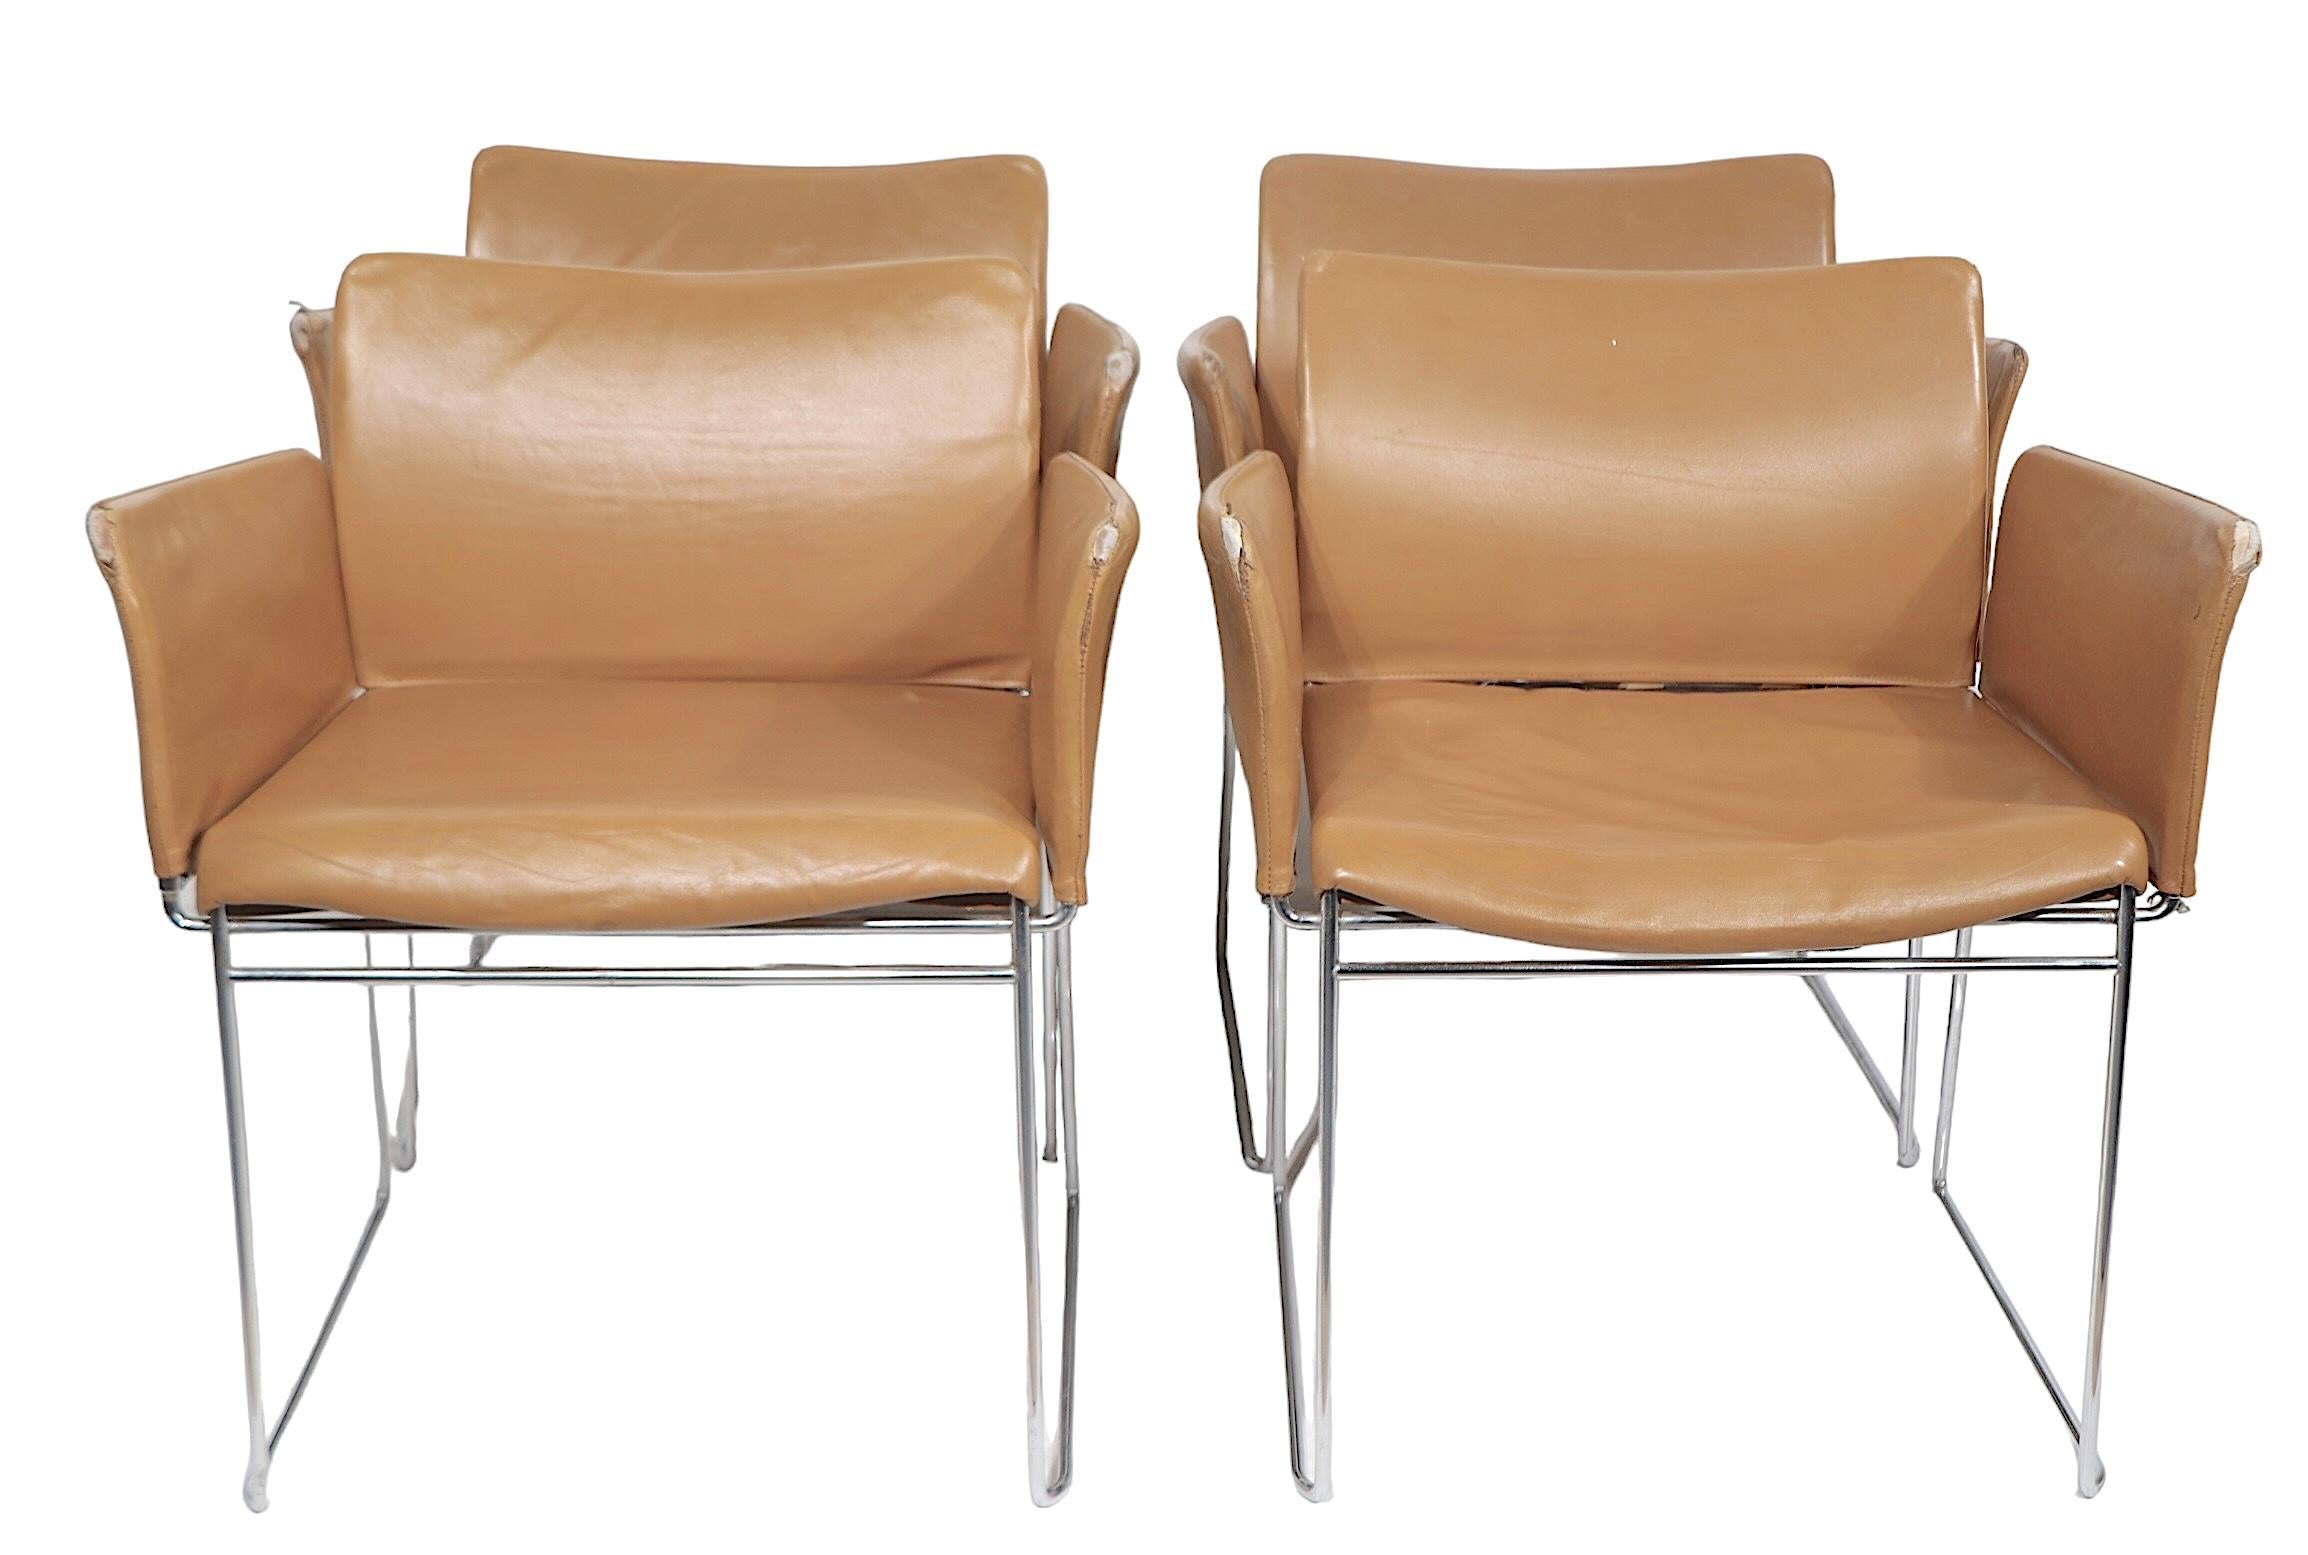 Set of four leather and chrome dining chairs designed by Kazuhide Takahama for Cassina circa 1960-1970's. The chairs feature leather seats, arm rests and backs, on bright chrome frames. The leather shows significant wear, and is selling in as is